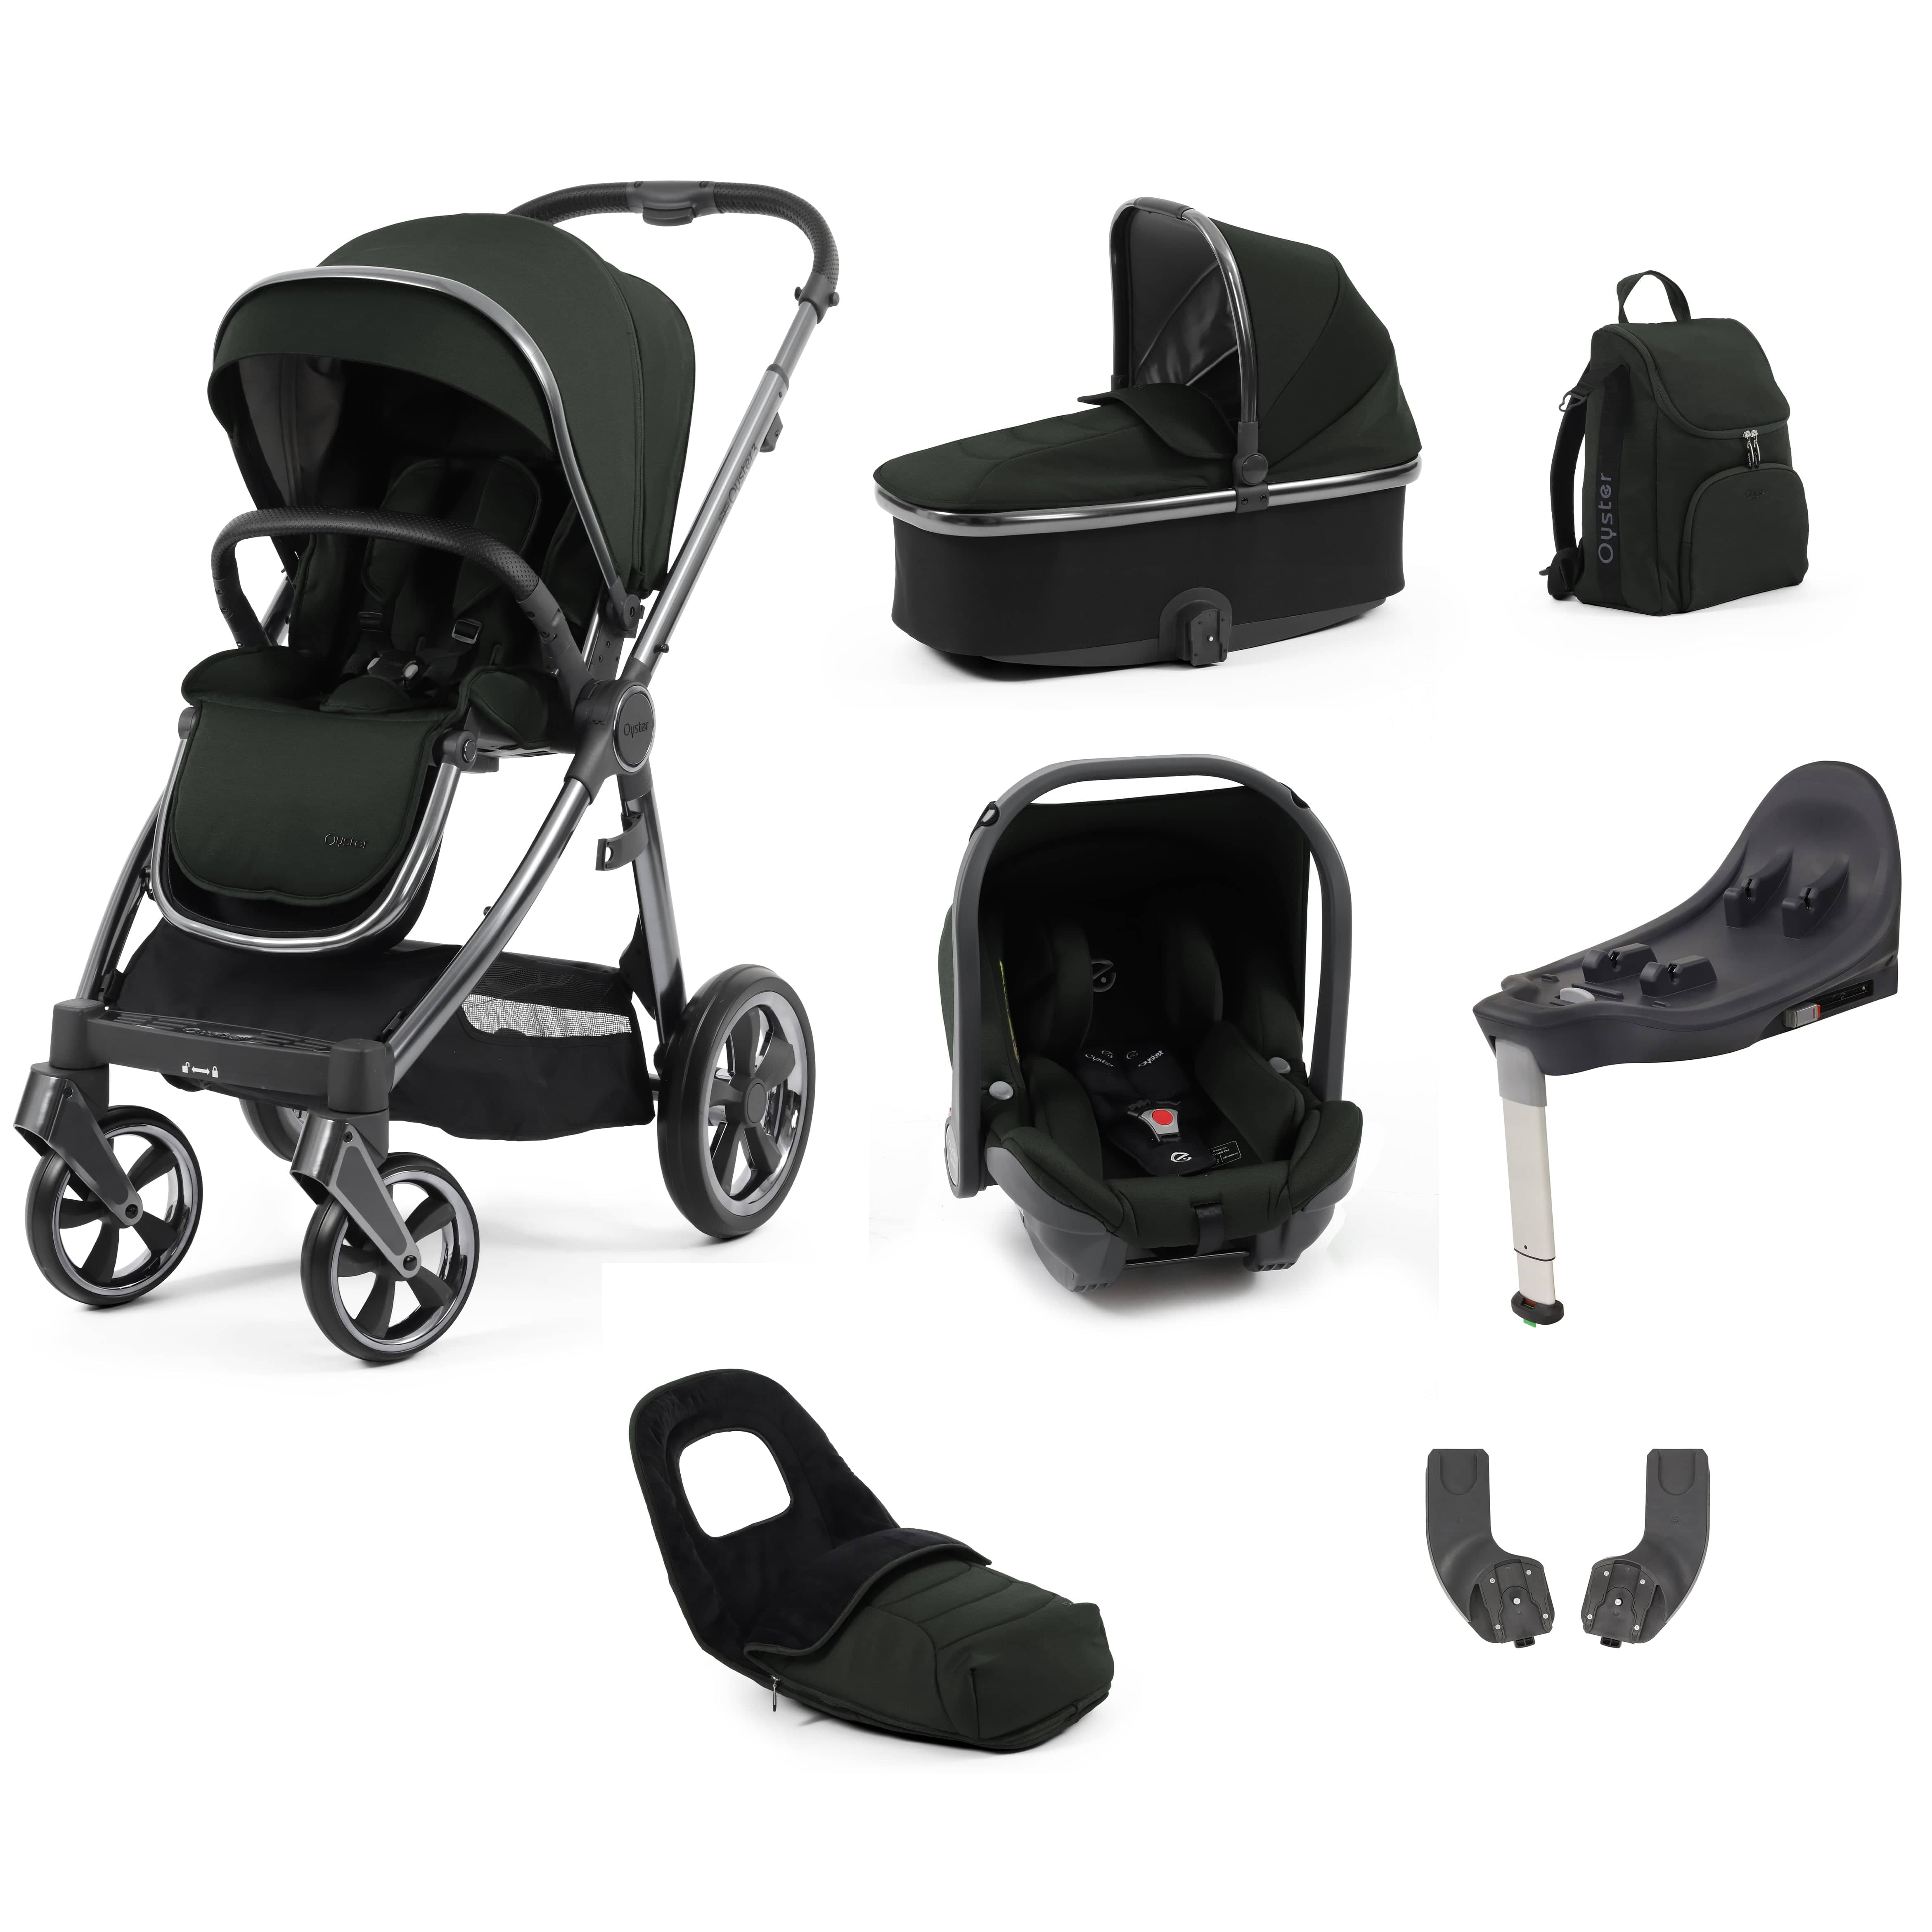 Babystyle Oyster 3 Luxury 7 Piece with Car Seat Bundle in Black Olive Travel Systems 14769-BLO 5060711567211